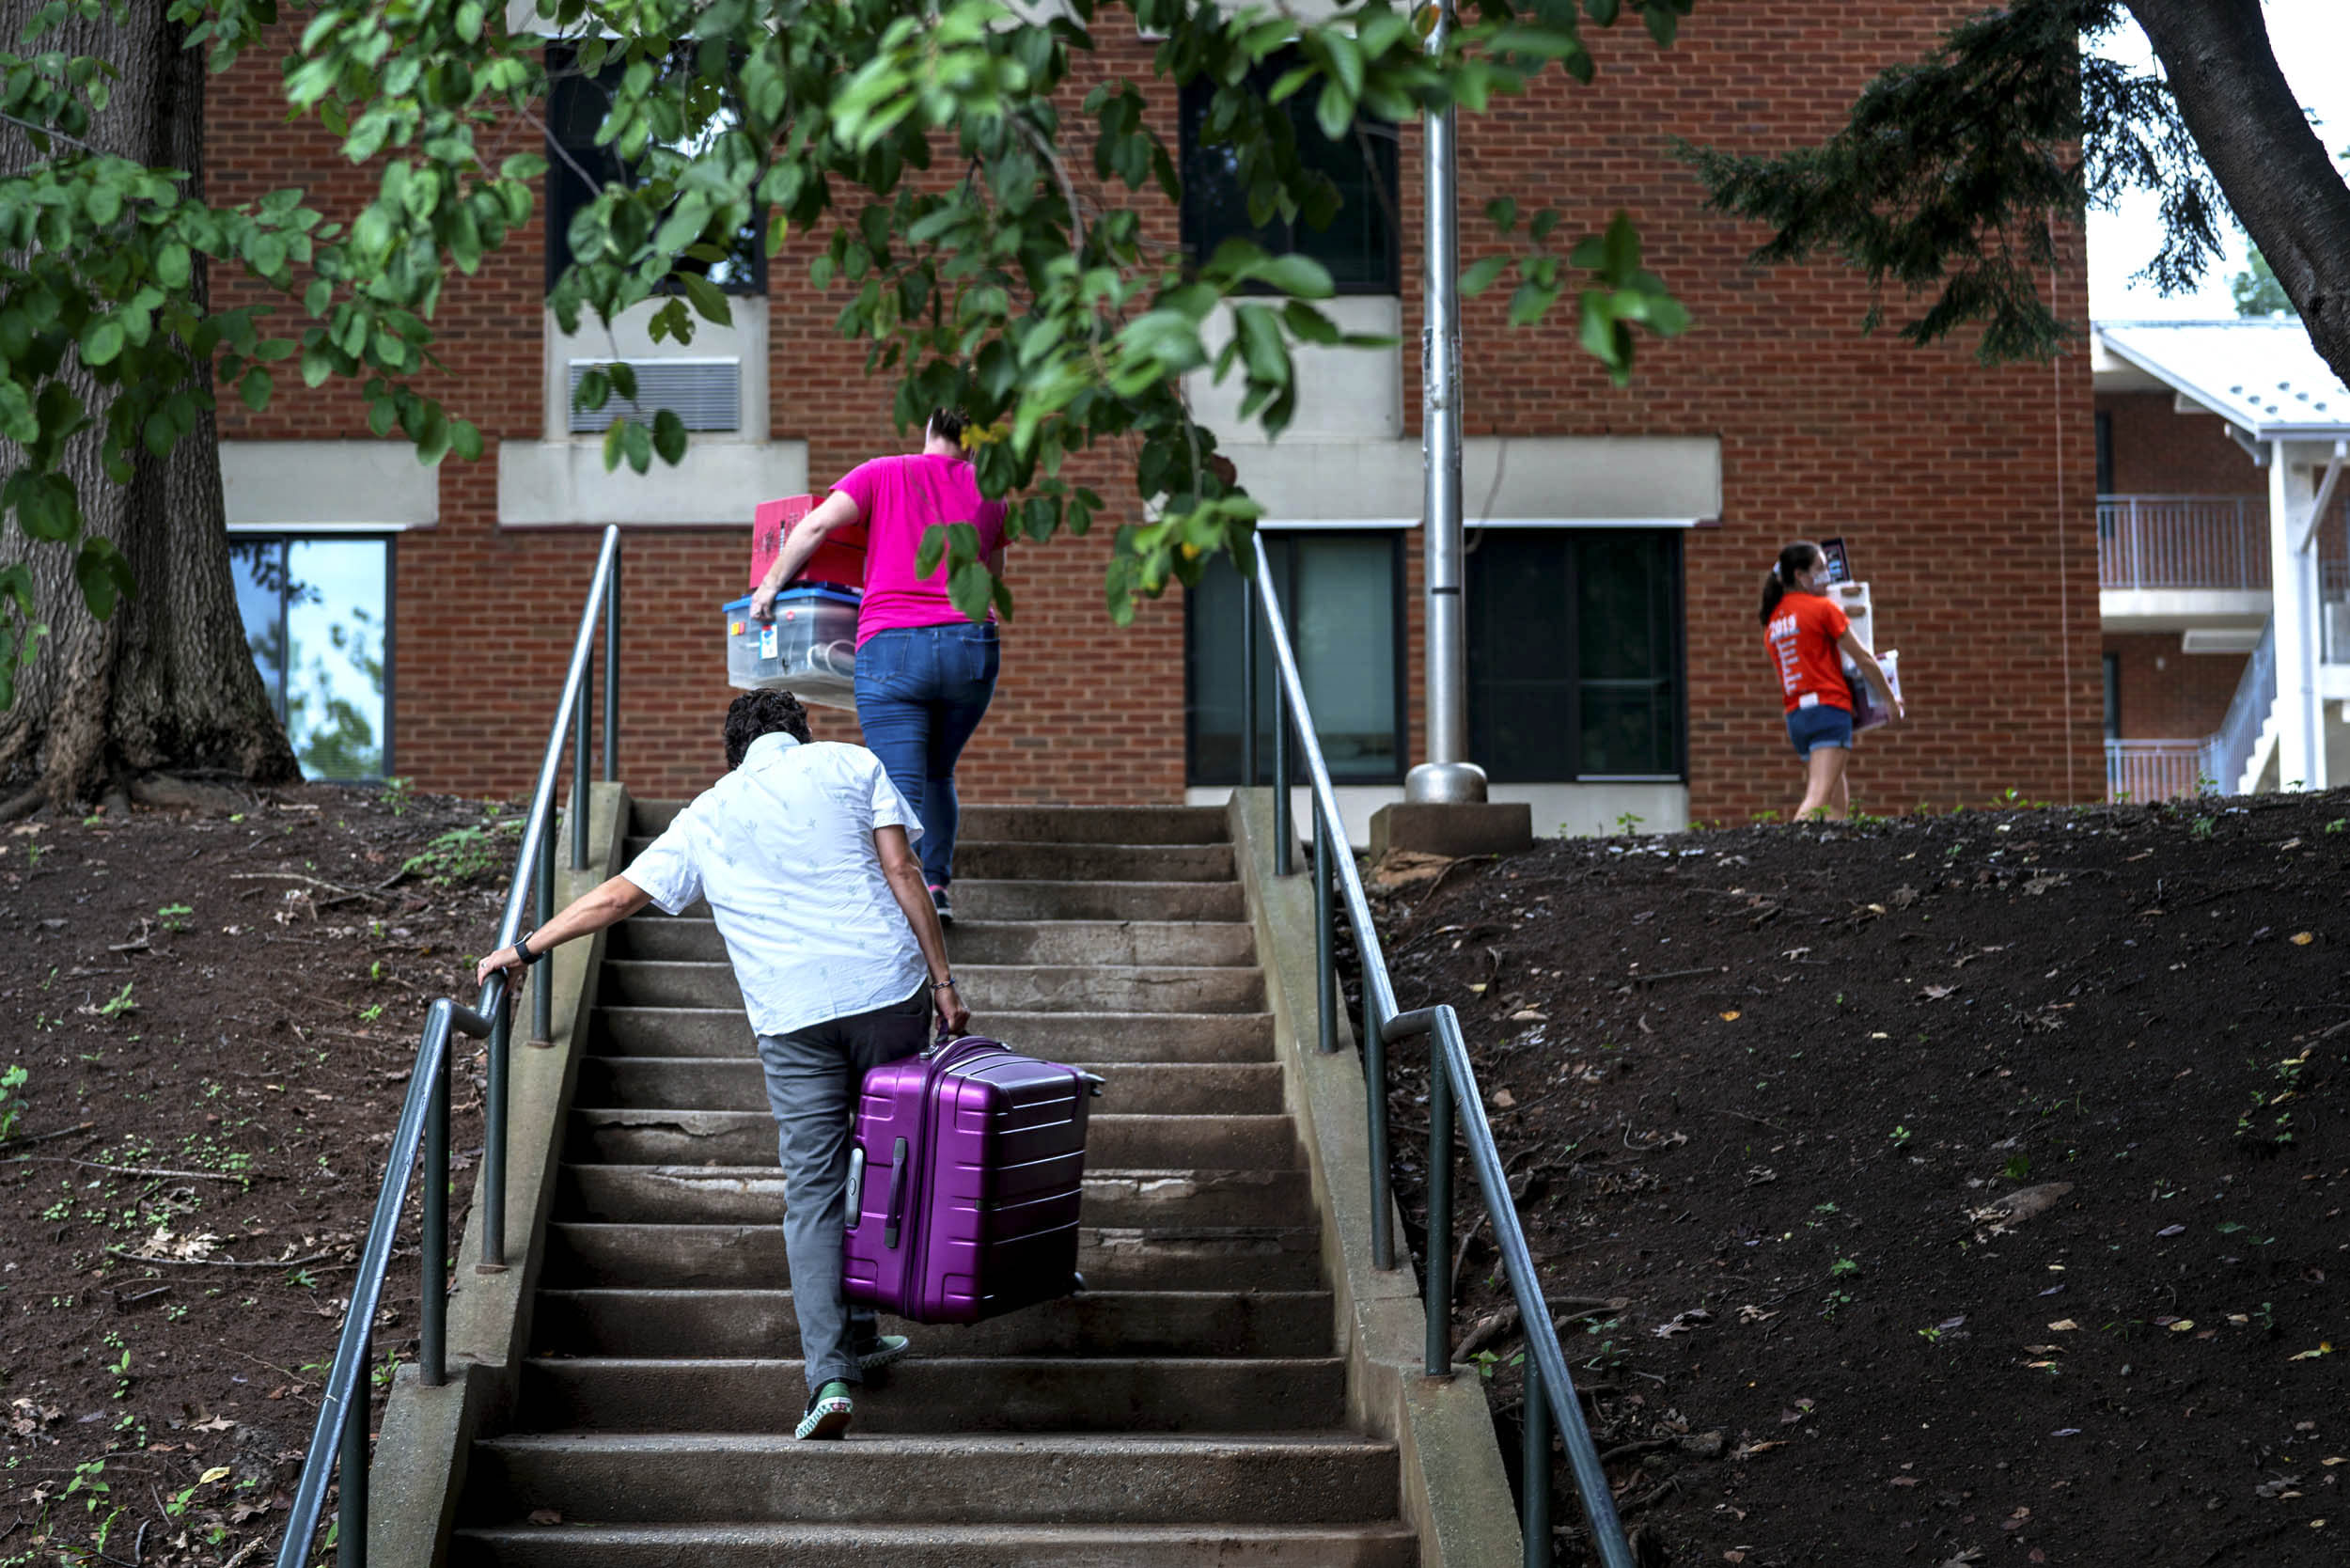 Students carrying bags of belongs as they move into dorms